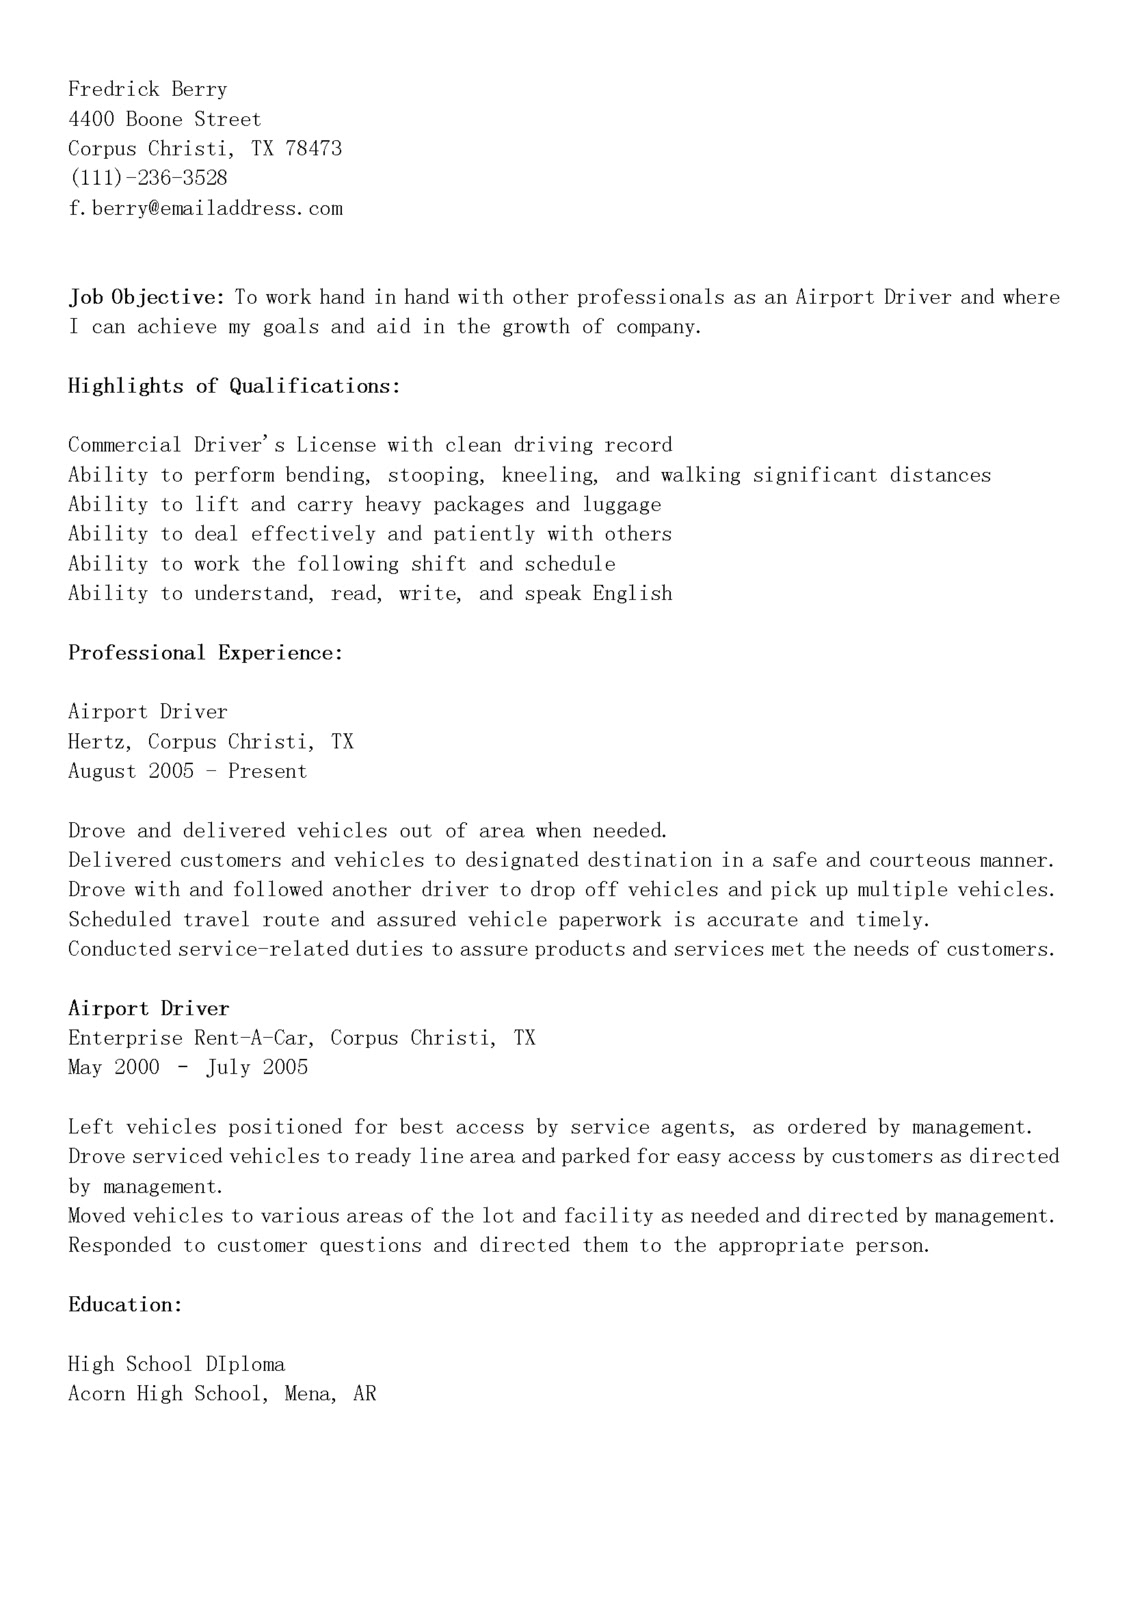 Cdl truck driving resume samples